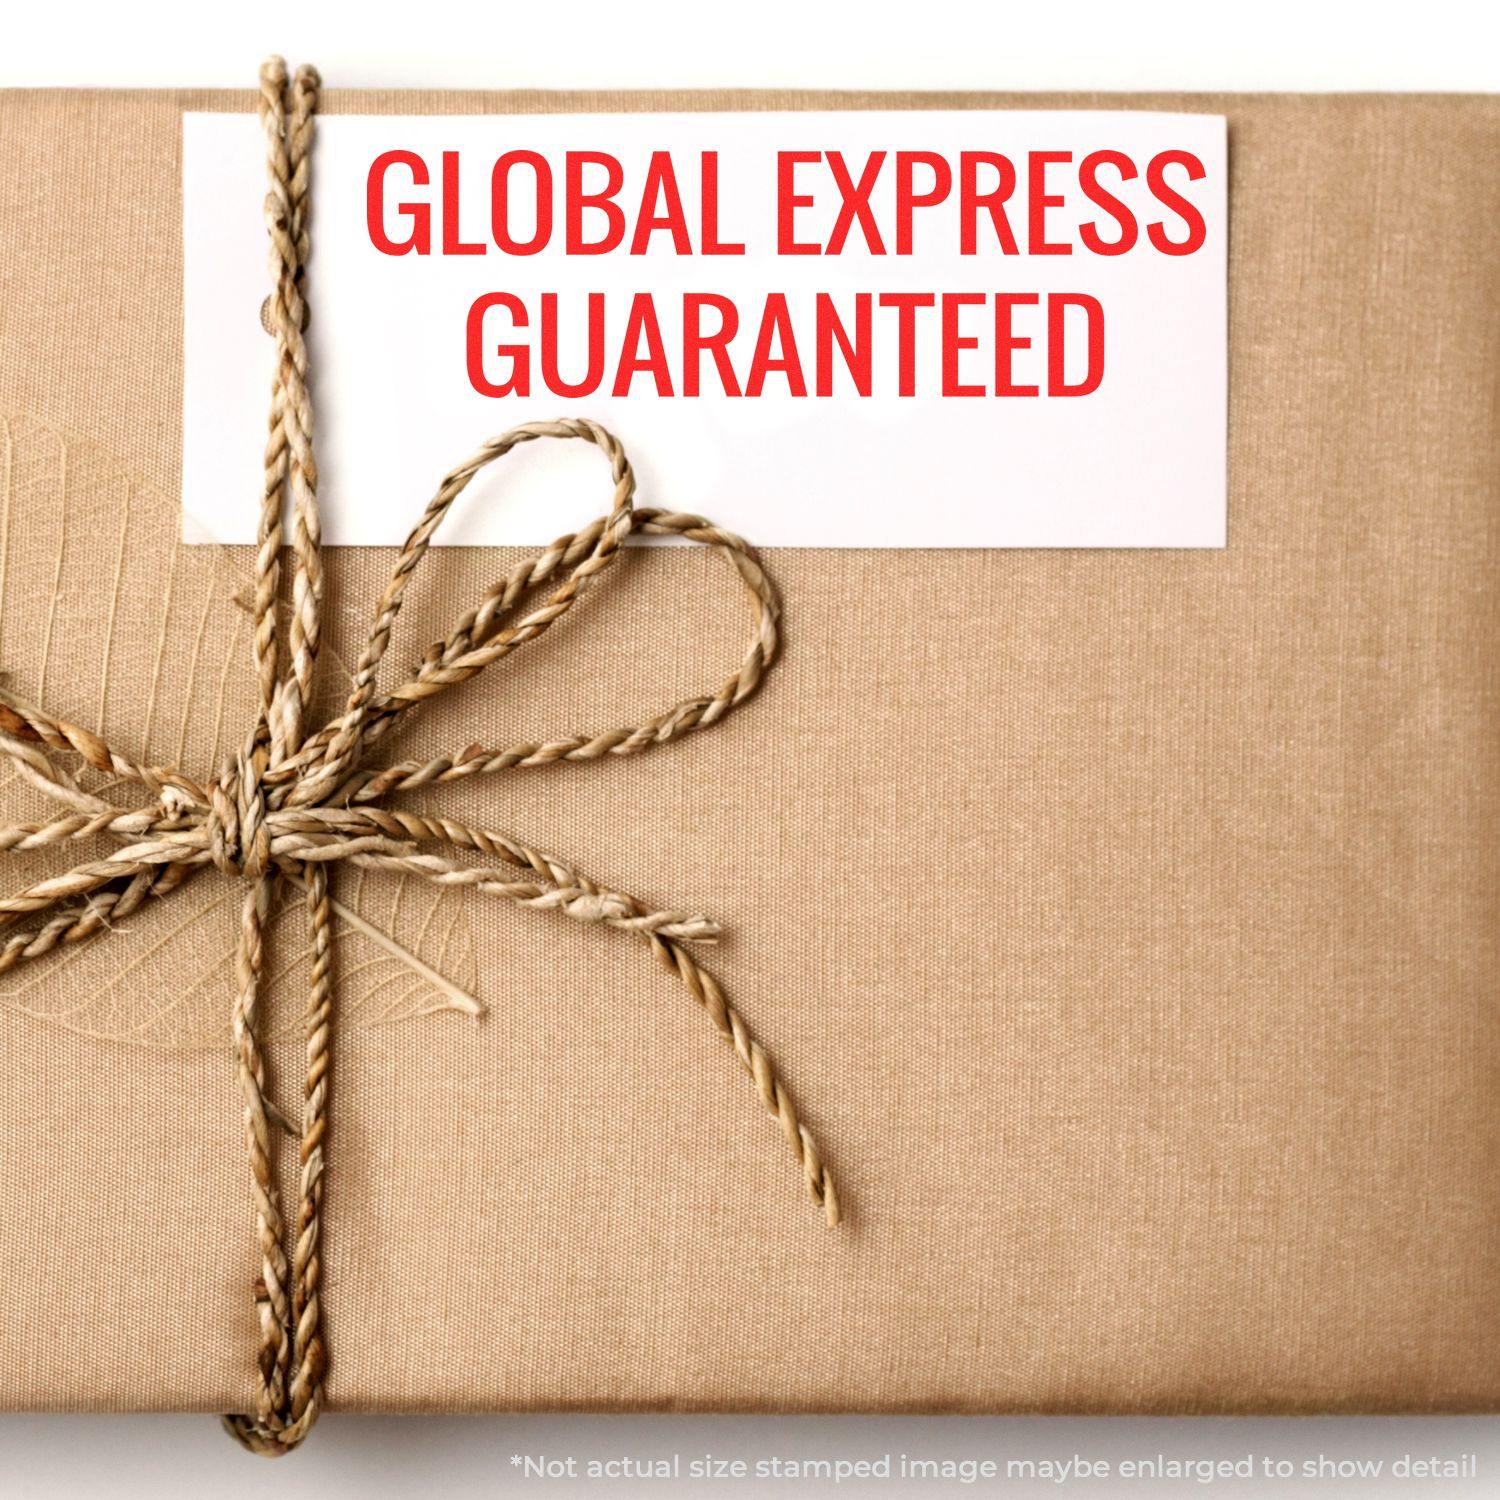 A self-inking stamp with a stamped image showing how the text "GLOBAL EXPRESS GUARANTEED" in a large font is displayed by it after stamping.